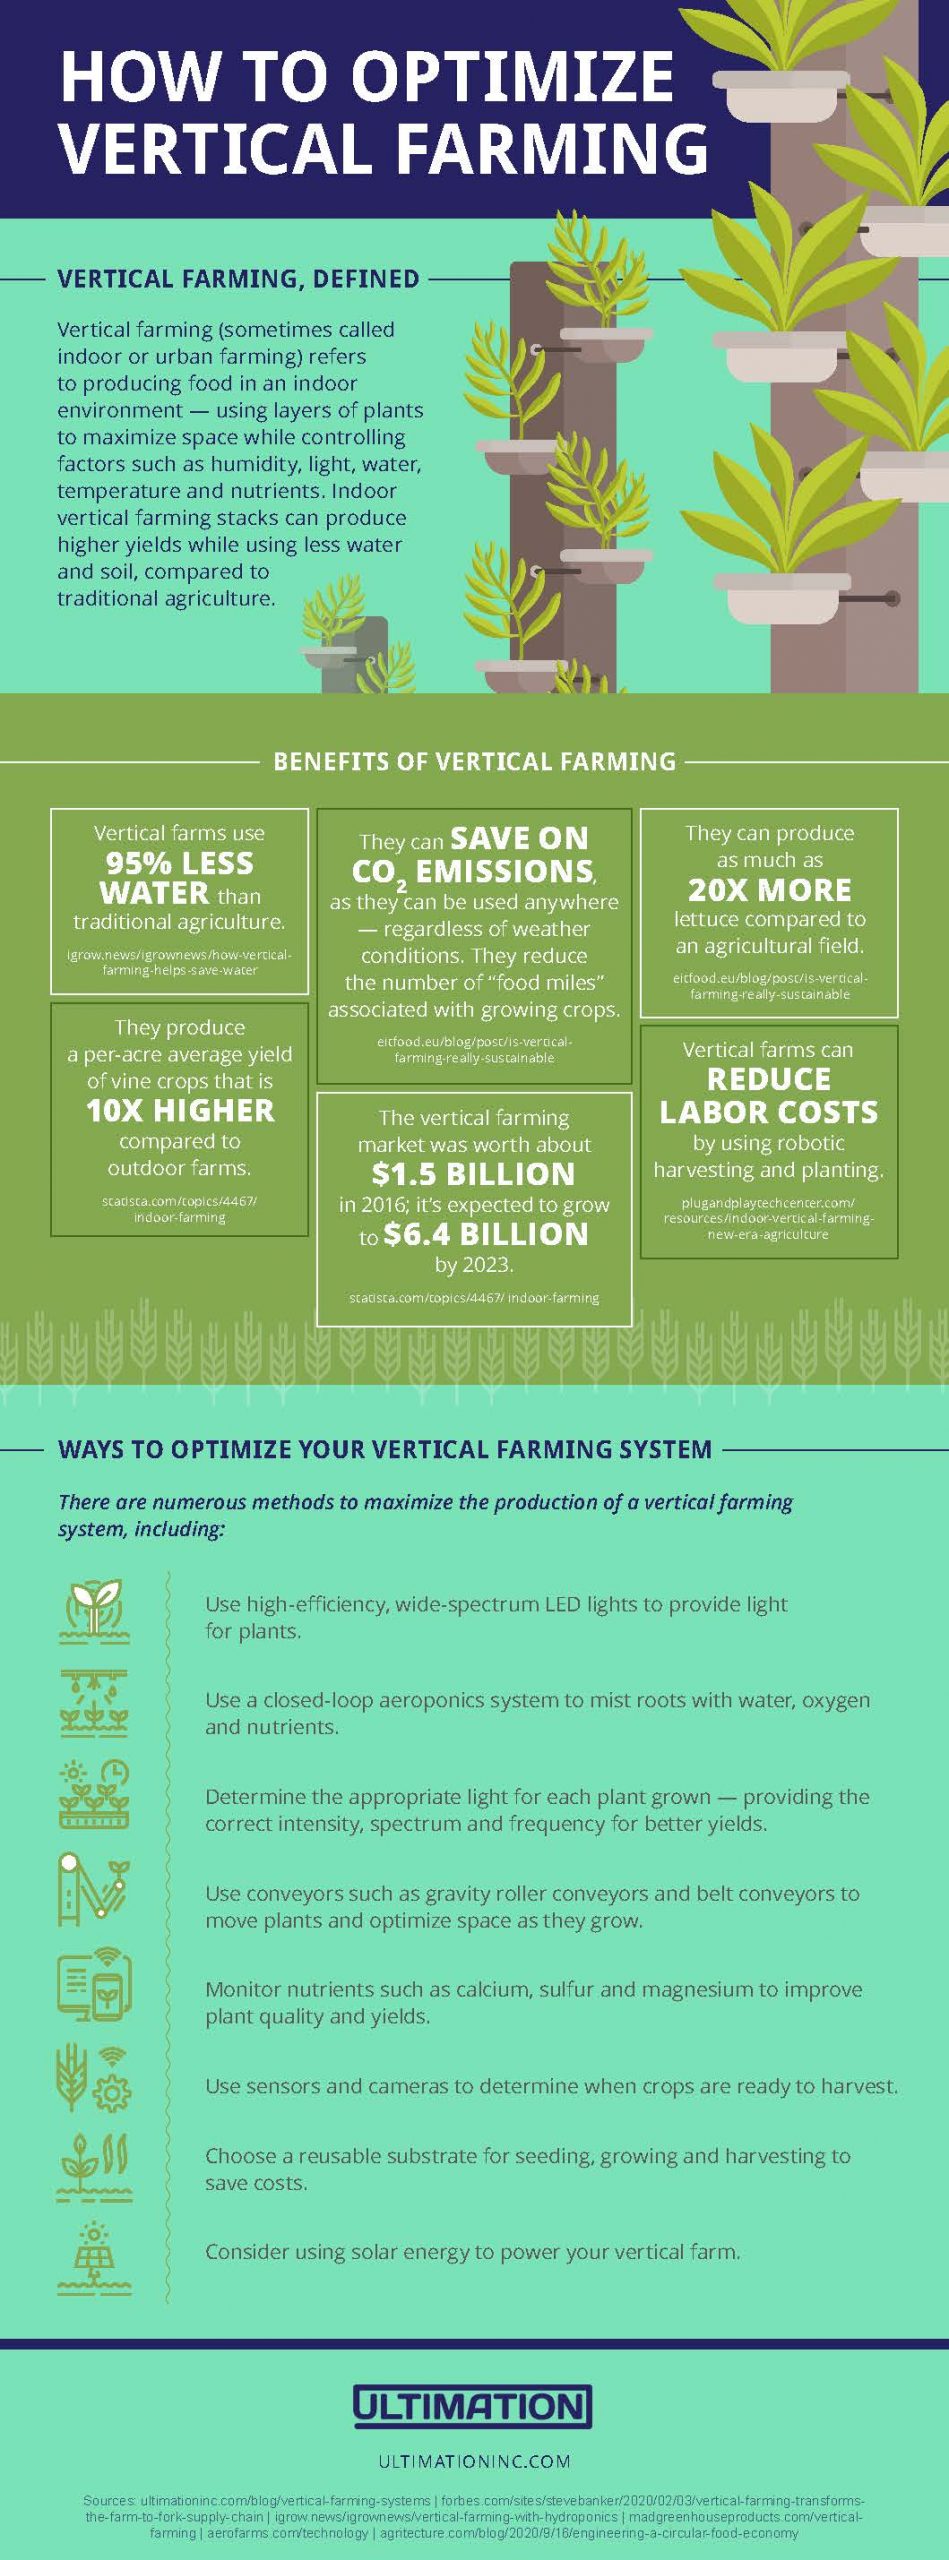 ultimation industries vertical farming infographic